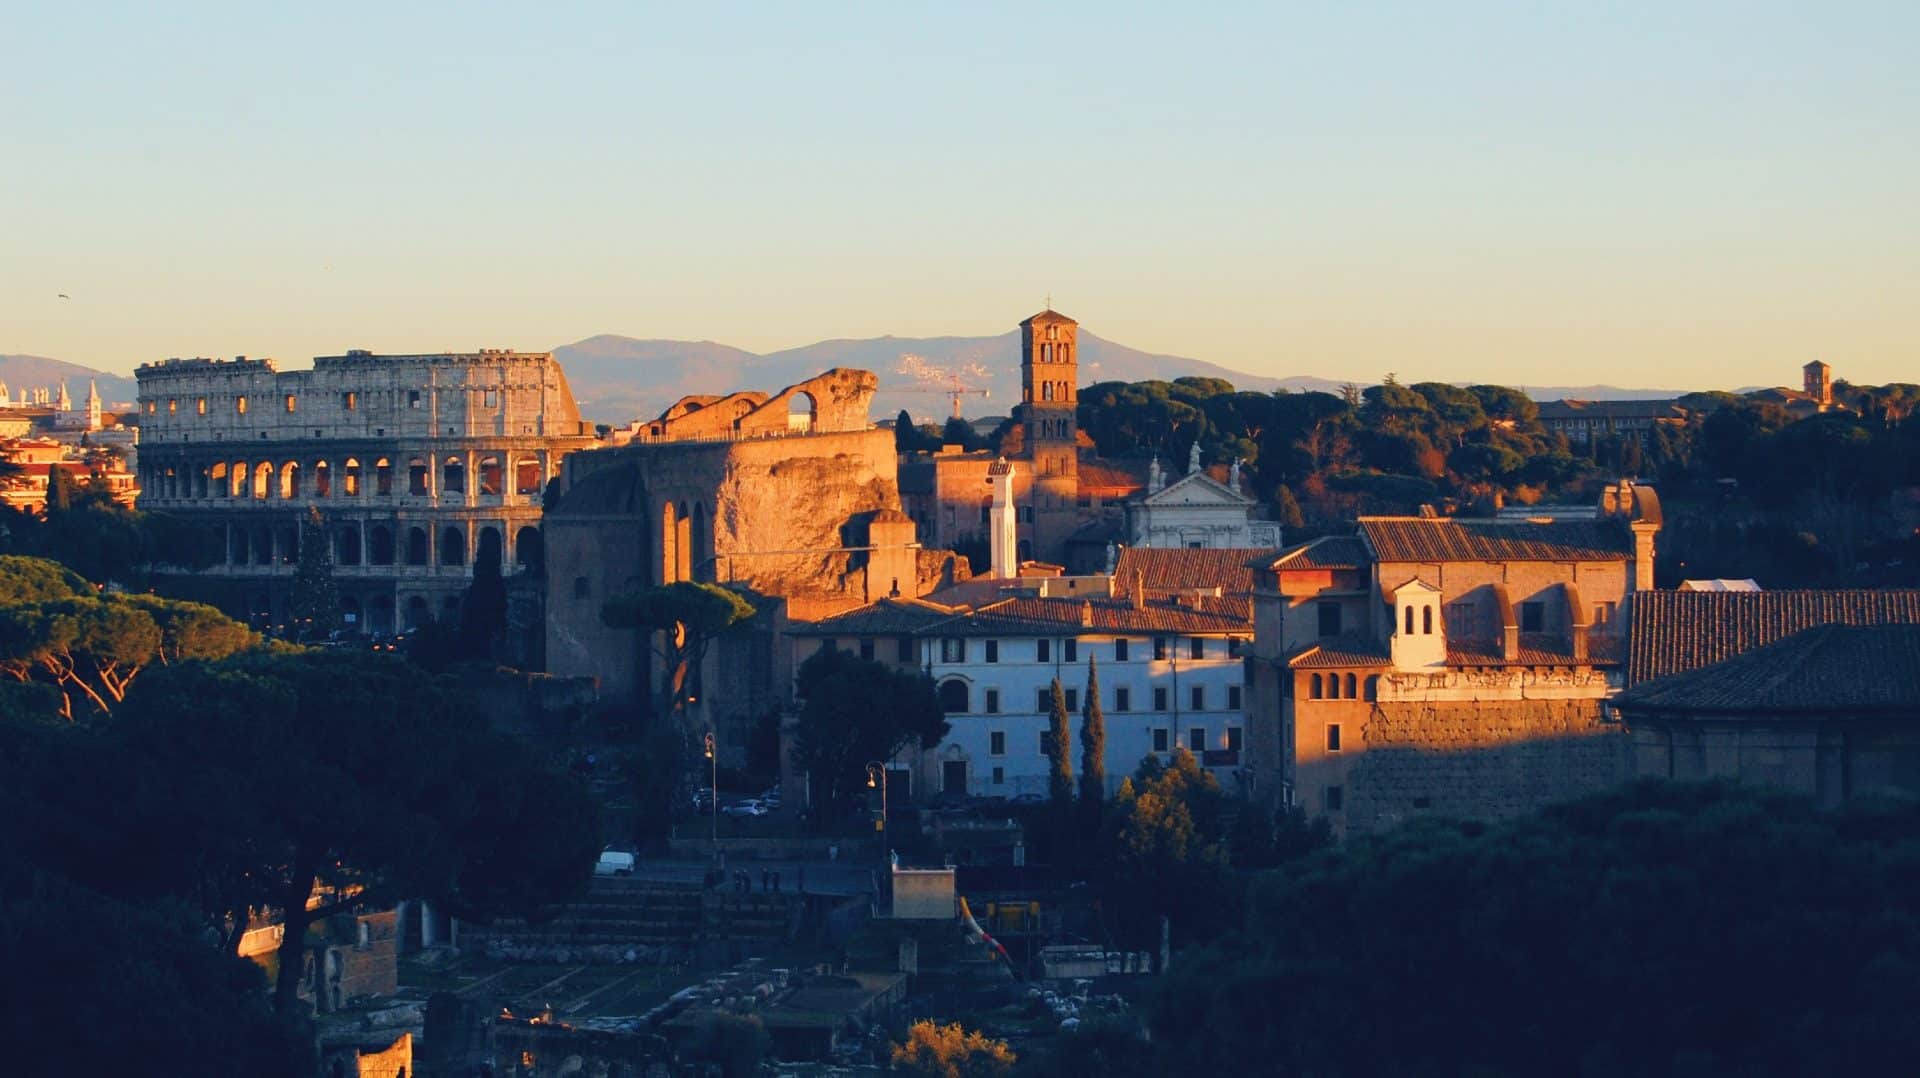 Views of Rome's historic centre from the panoramic terrace of the Vittorio Emmanuele Monument